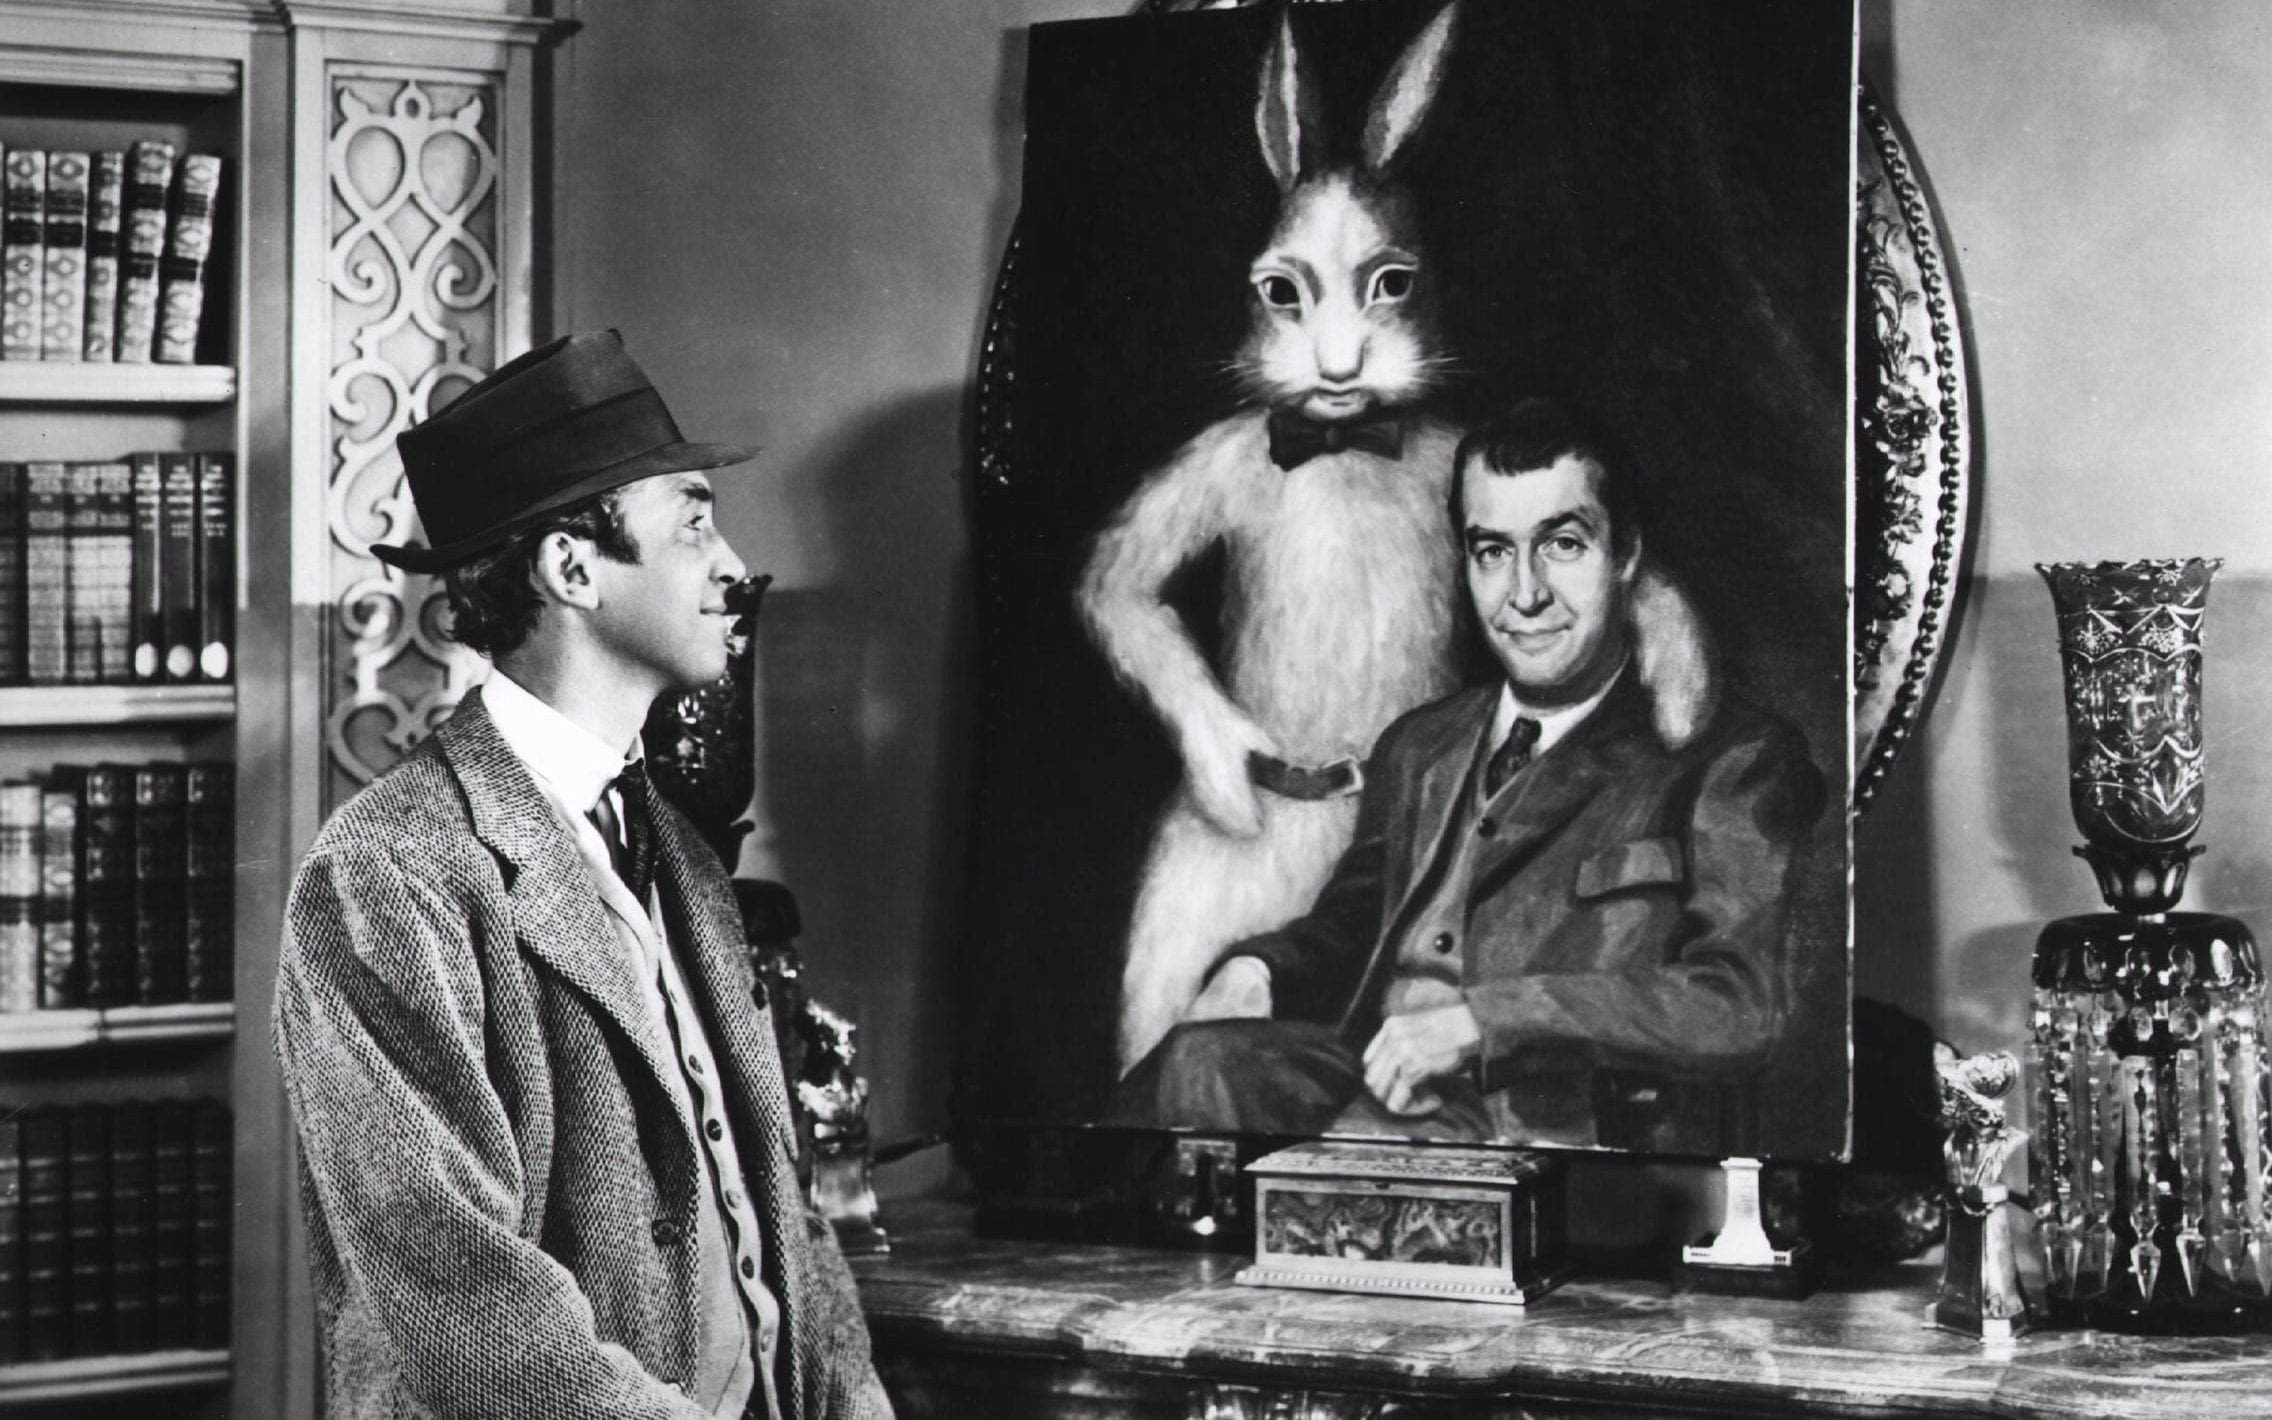 Jimmy Stewart and the giant rabbit: how Harvey captured Hollywood’s imagination